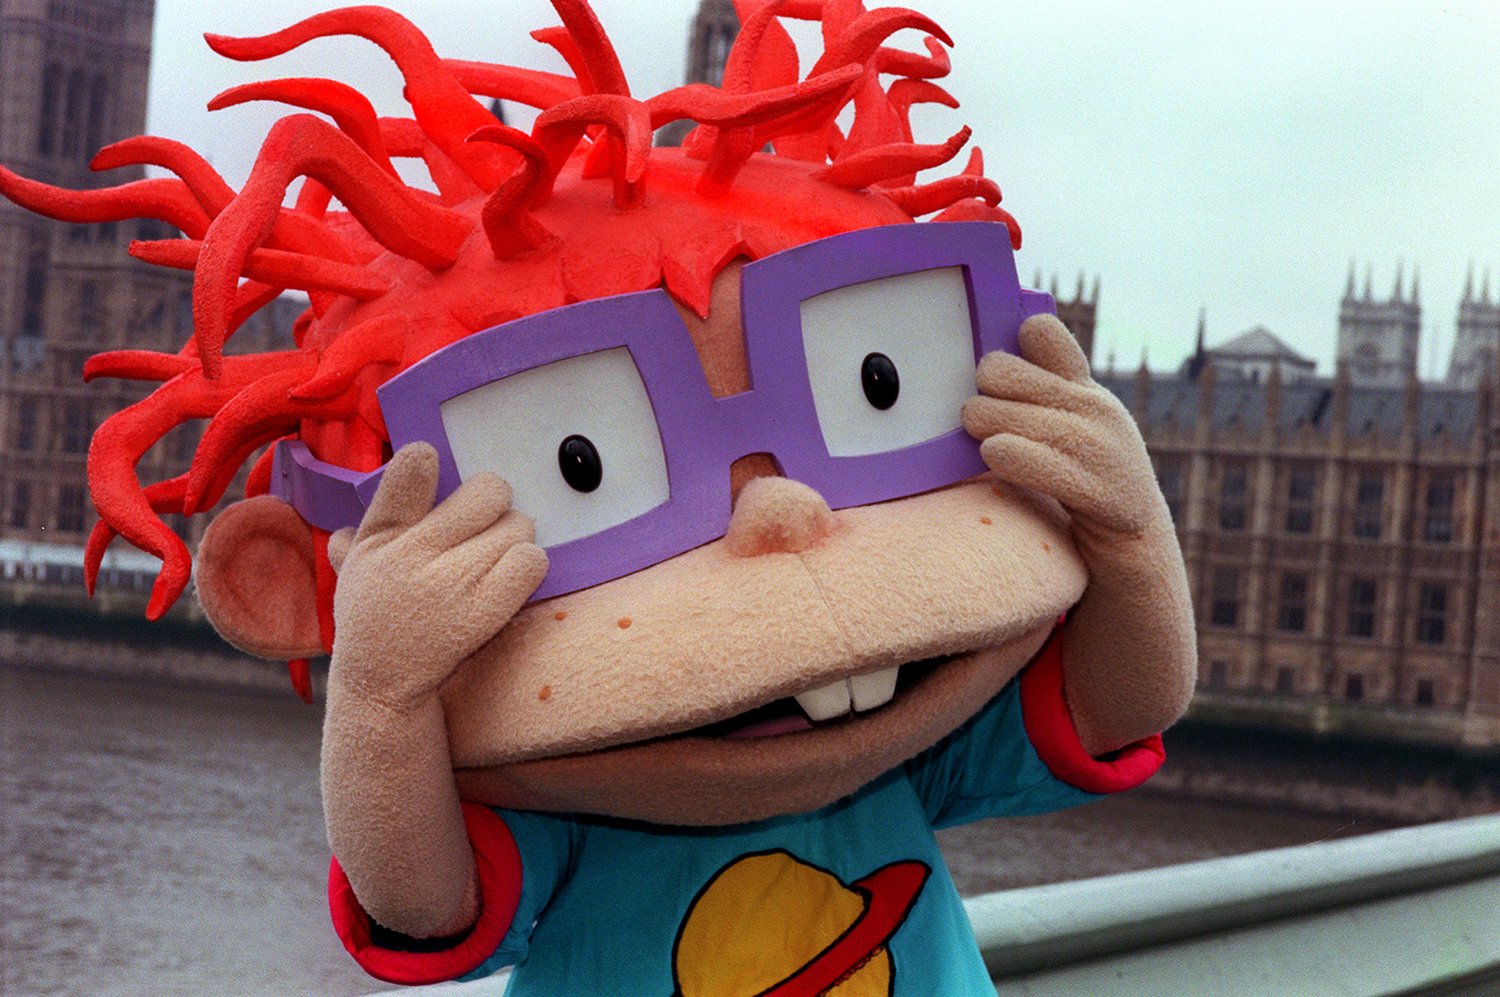 Rugrats character Chuckie at Westminster Bridge in London